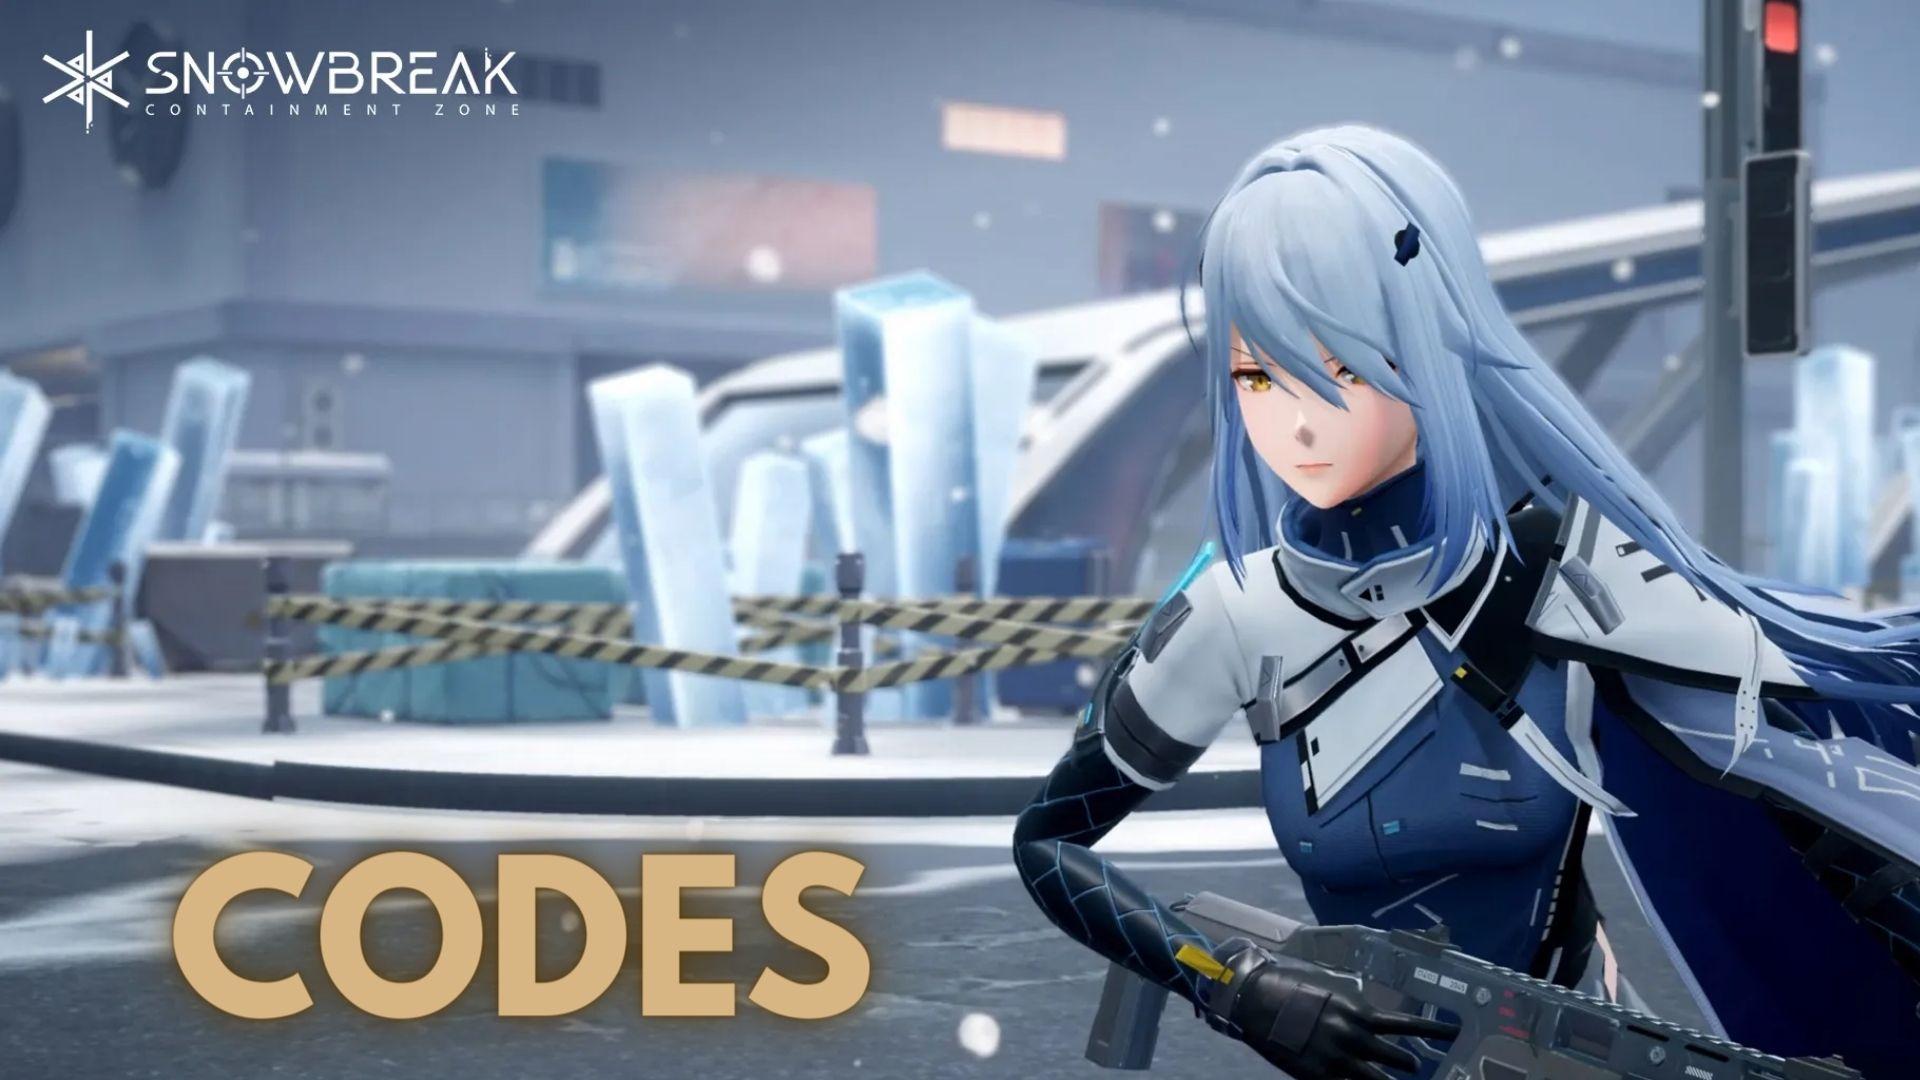 Snowbreak: Containment Zone What is the Best Class to Choose - The Top S  Class Heroes-Game Guides-LDPlayer